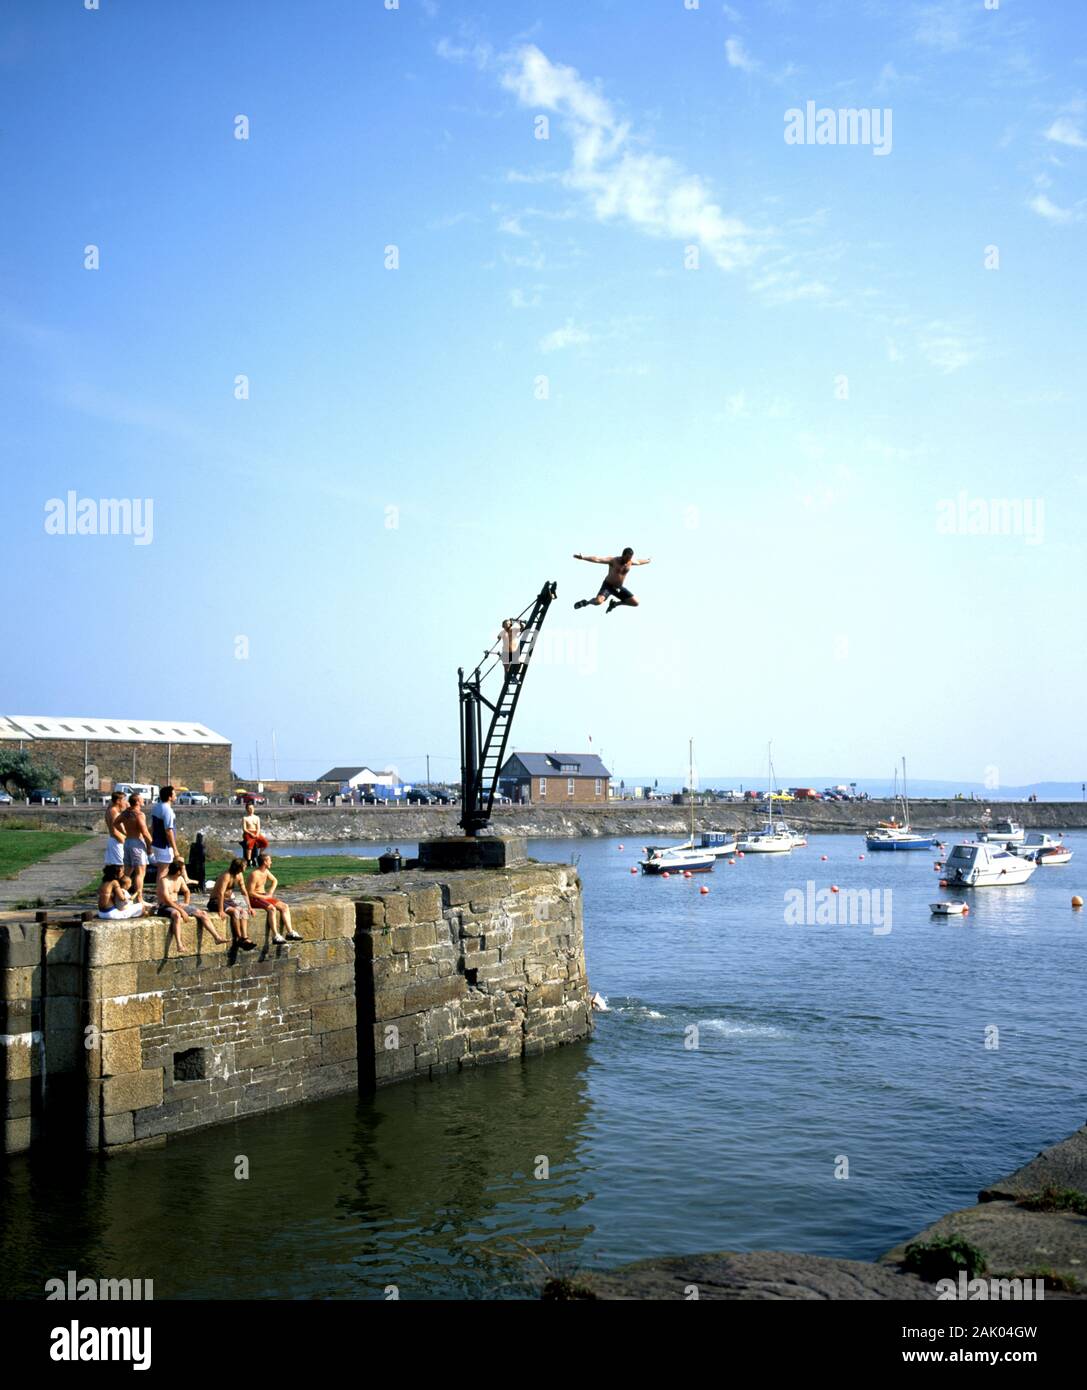 Young men leaping from crane into Bury Port Docks near Llanelli, Carmarthenshire, West Wales. Stock Photo